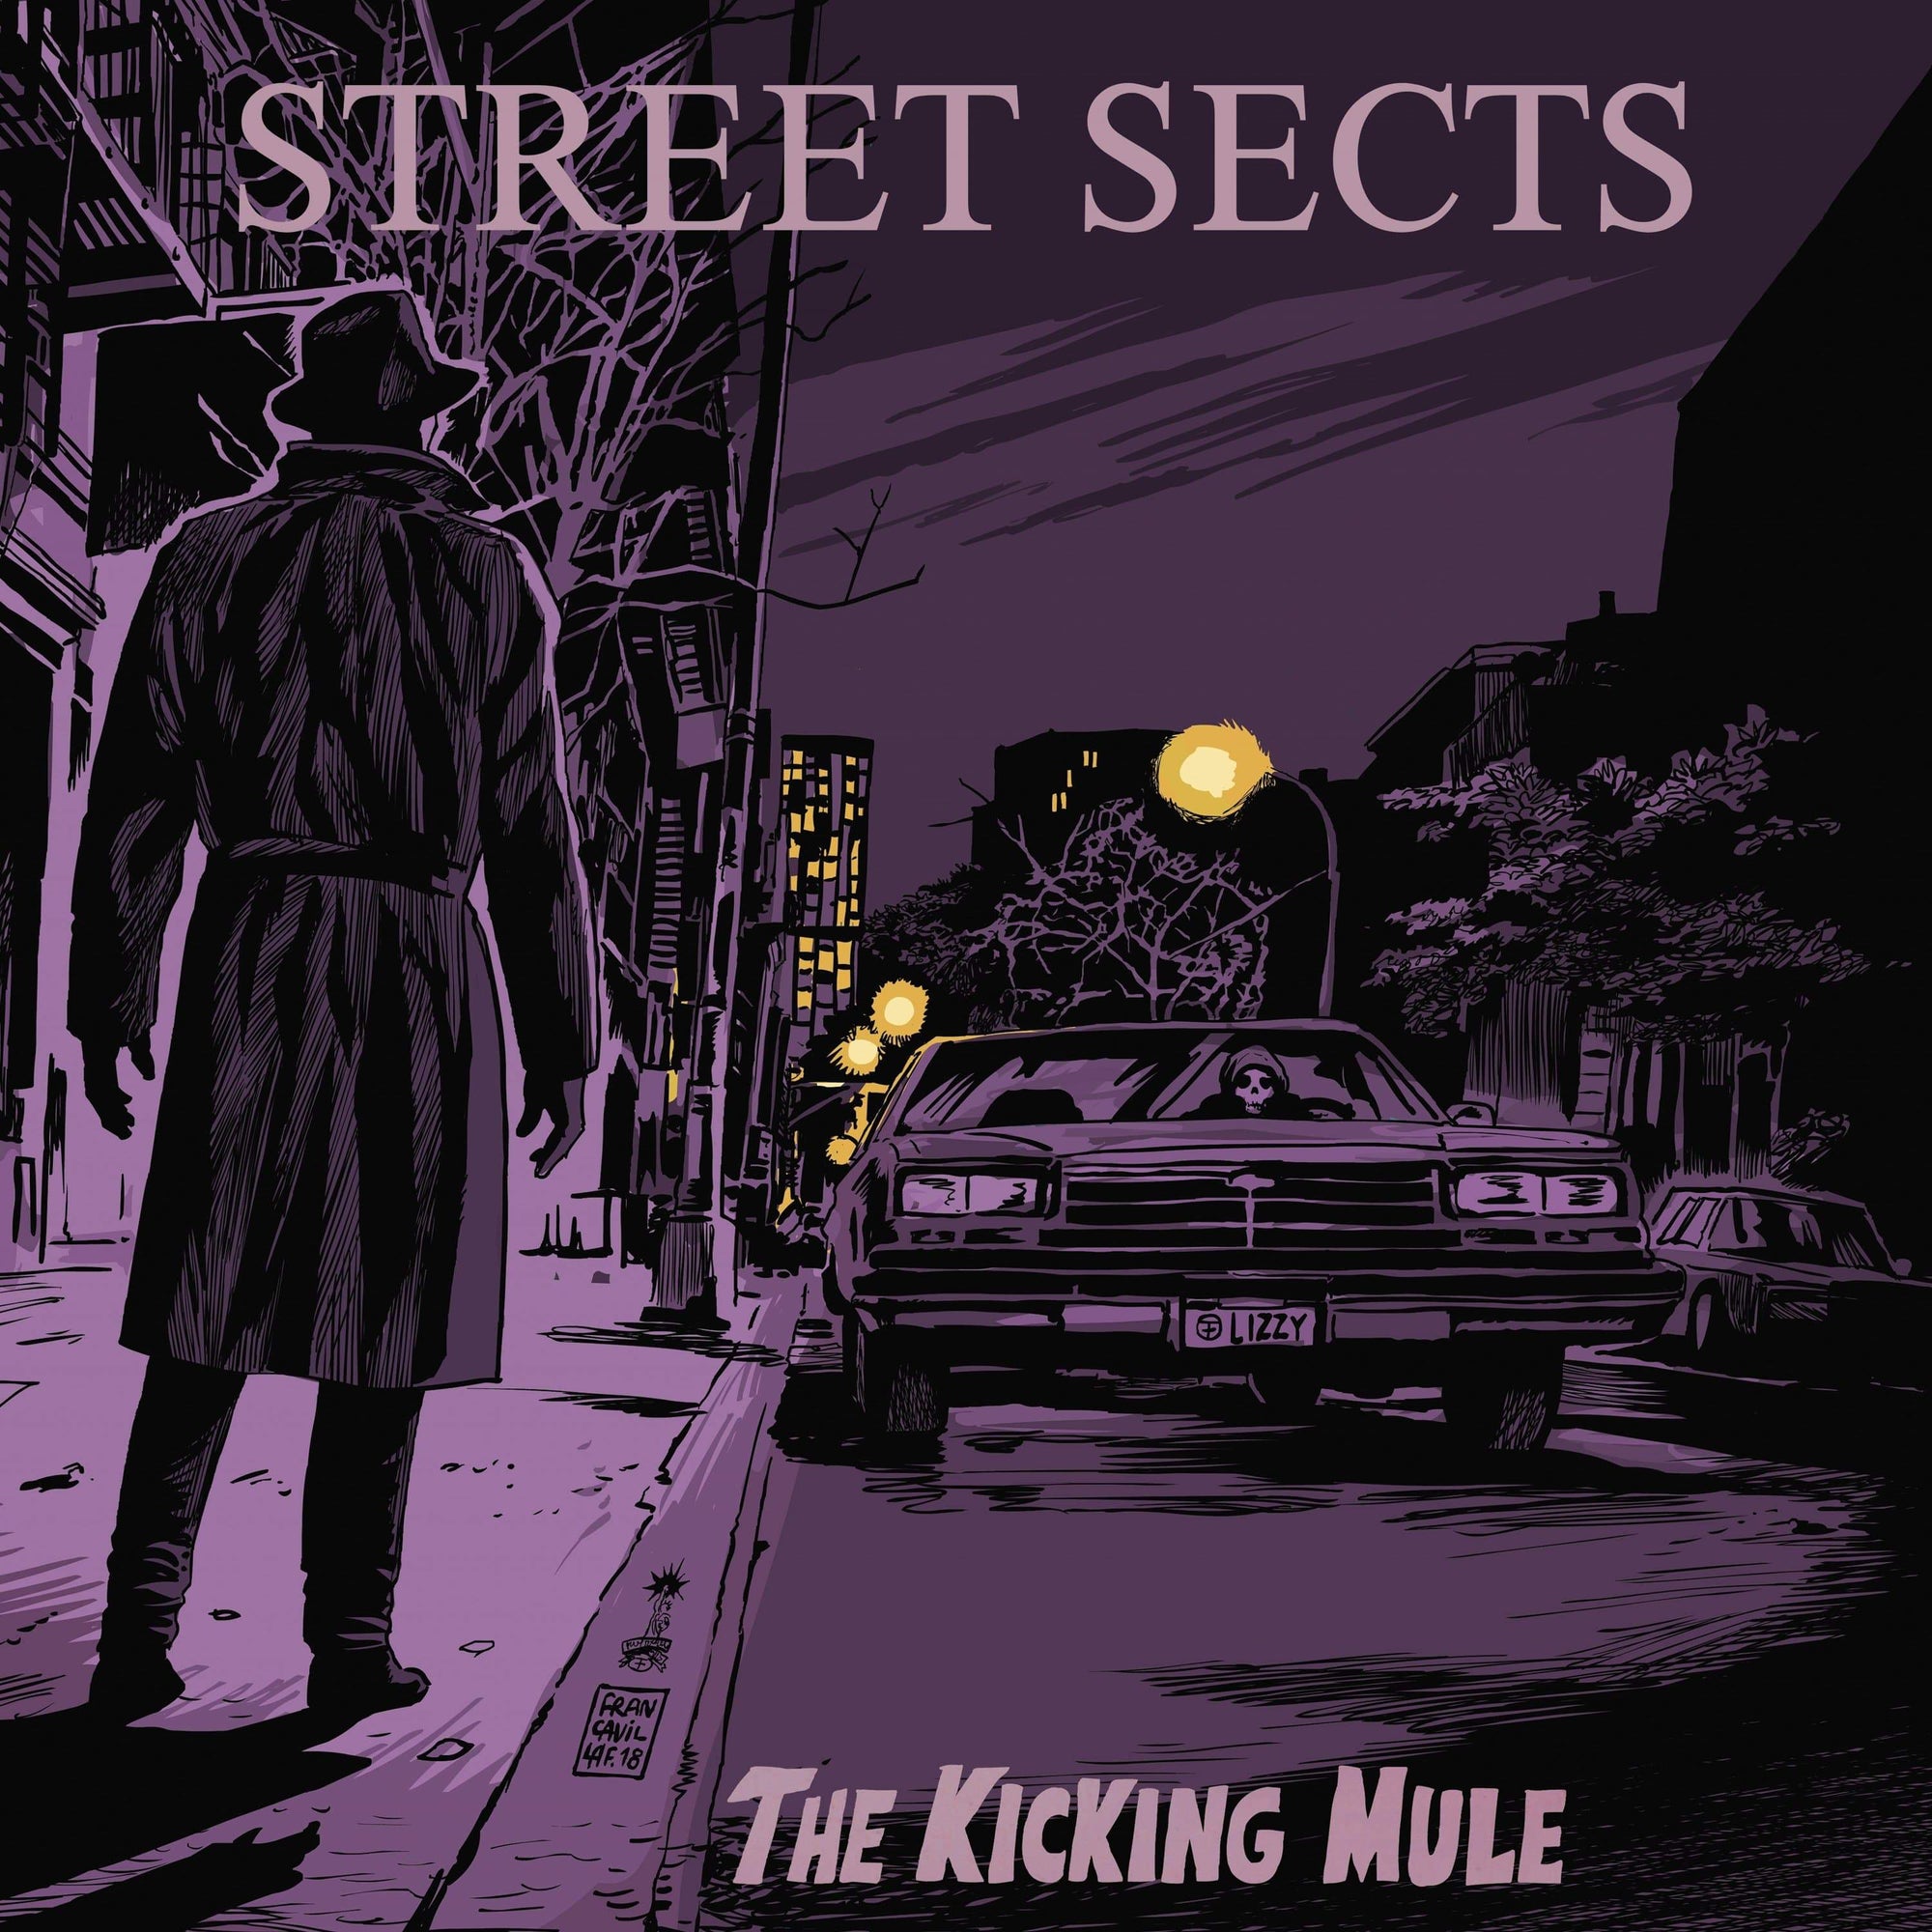 The Flenser CD Street Sects "The Kicking Mule" CD